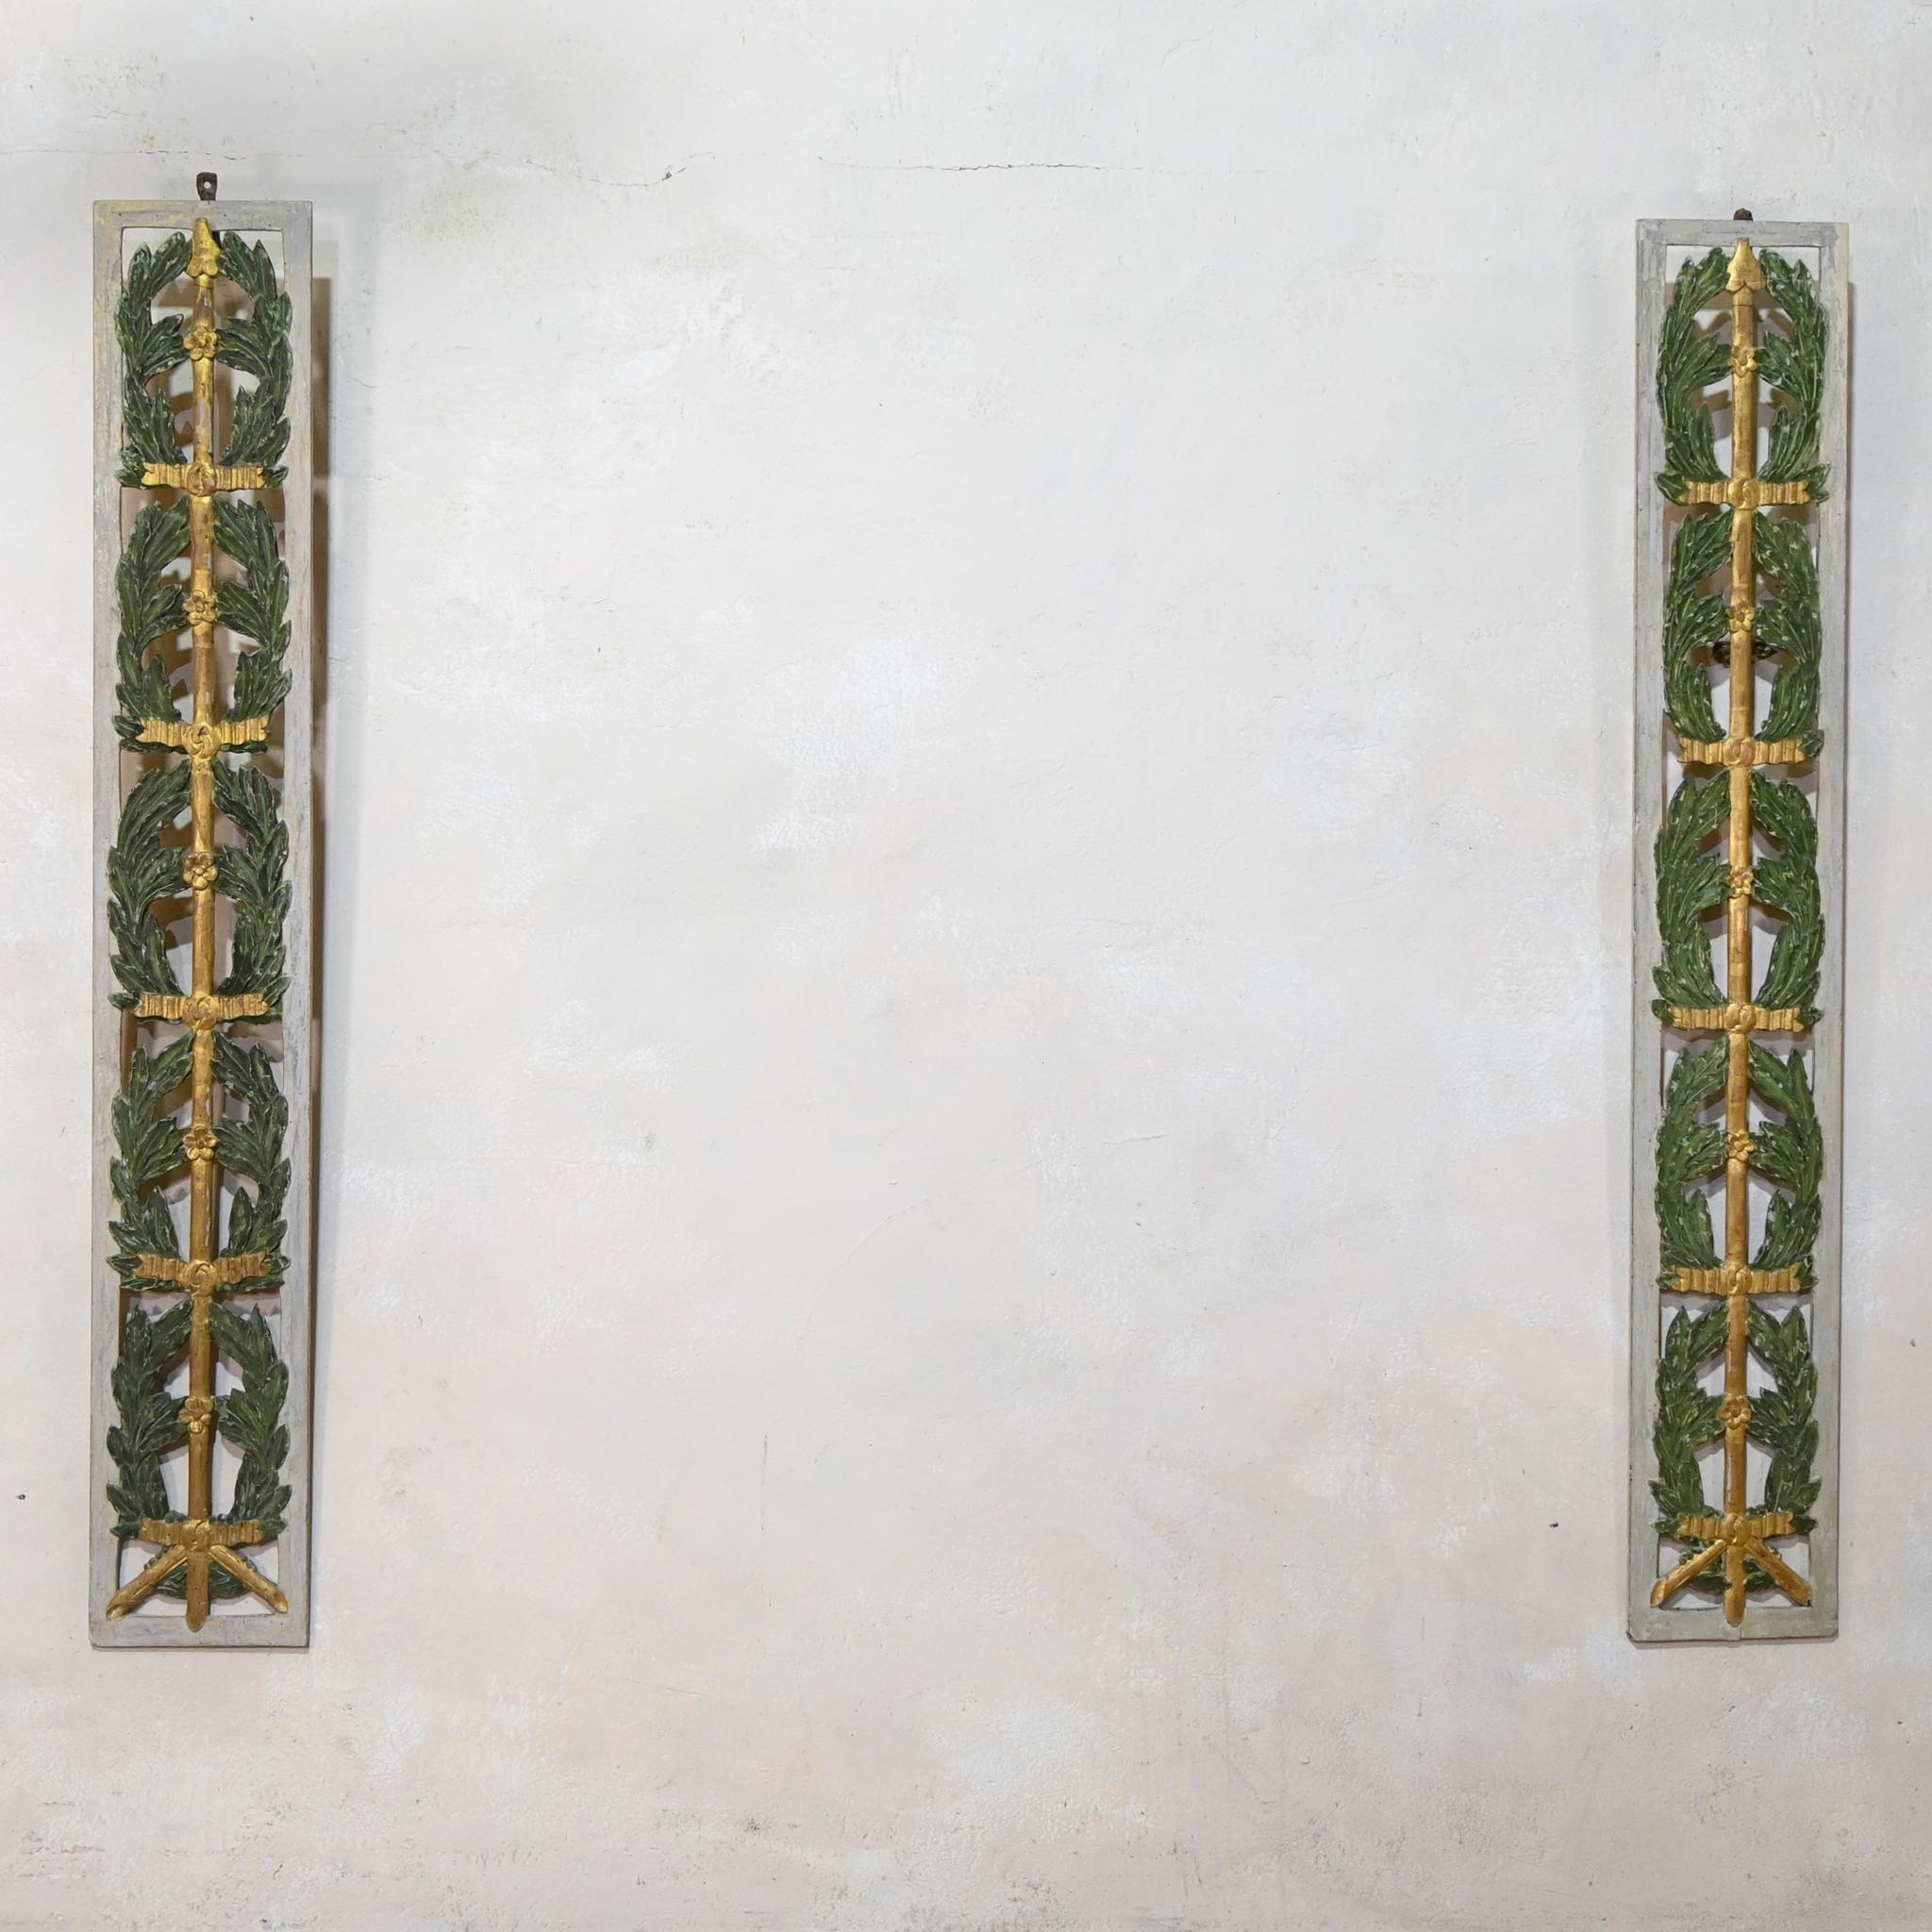 A highly decorative pair of early 19th century Italian Pierced Boiserie type architectural wall panels. Displaying original painted foliage decoration, with gilt accents throughout.

Measures: Height - 143cm 
Width - 21.5 - 22cm 
Depth - 0.8cm.
 